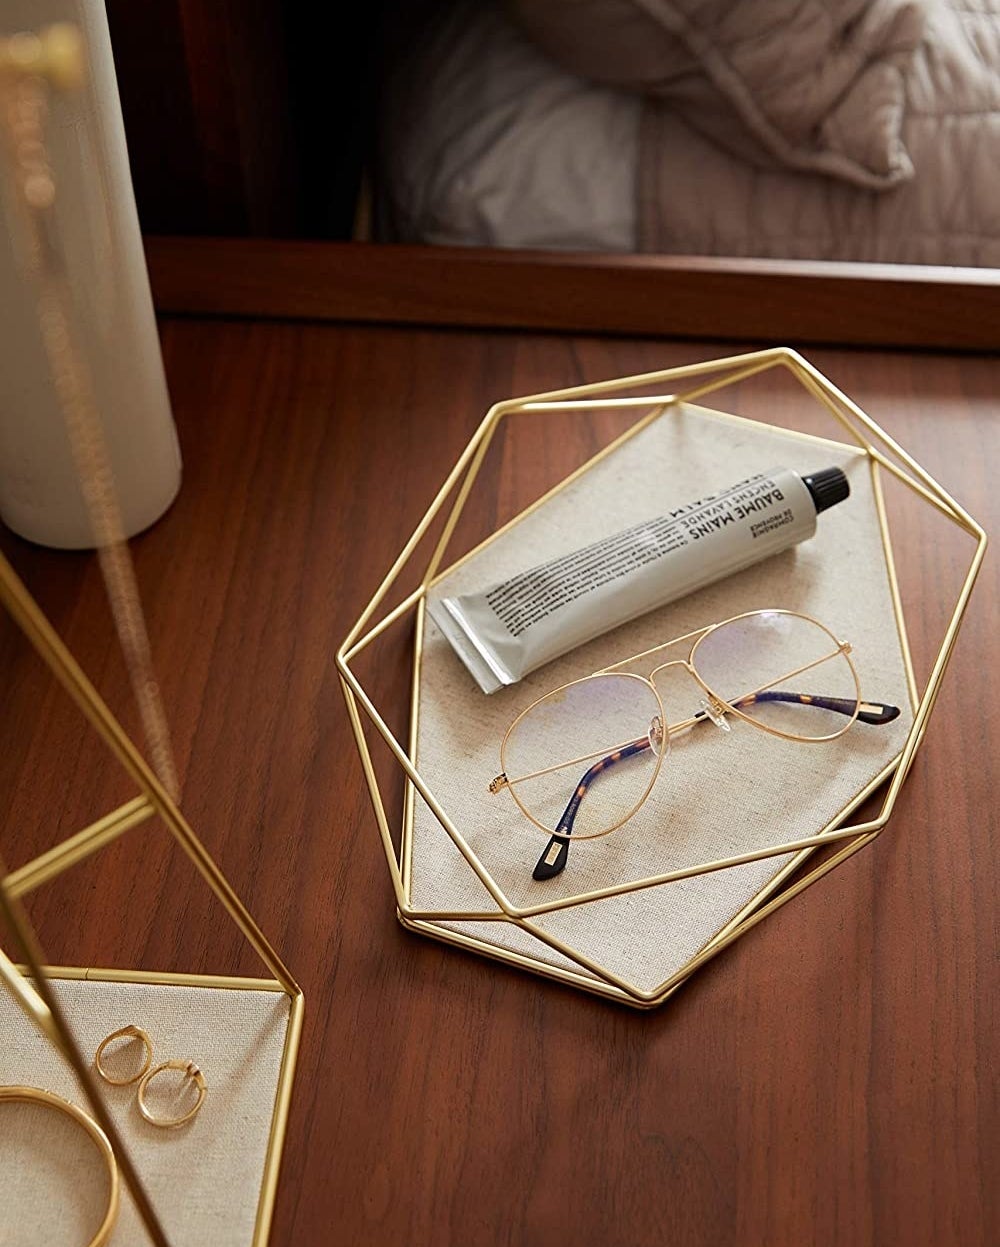 The trinket tray on a bedside table with a tube of cream and a pair of glasses placed inside